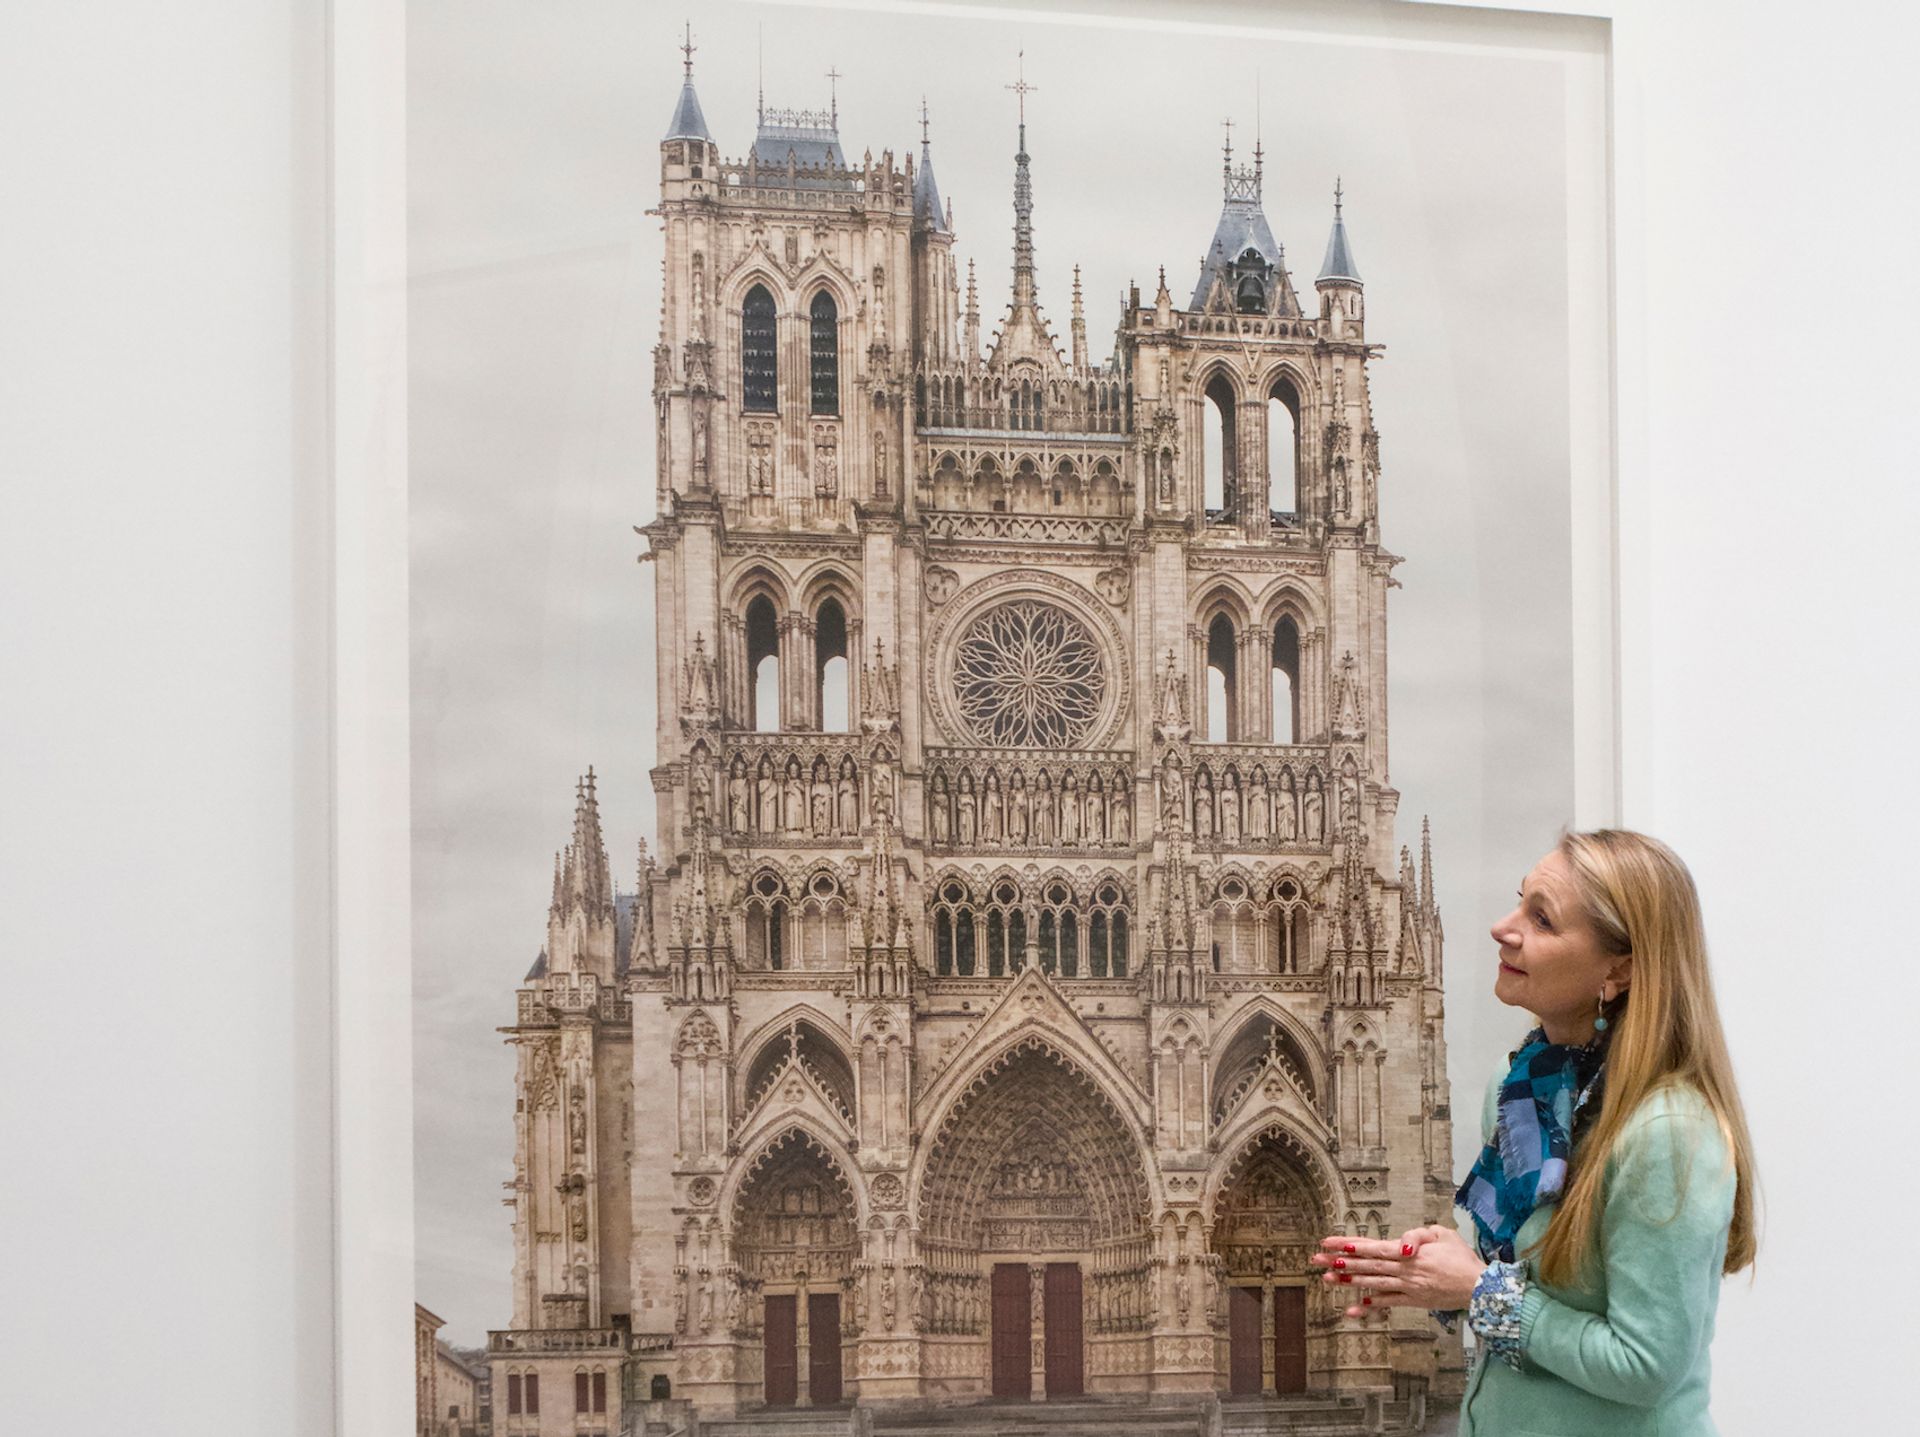 Fanny Pereire with Amiens, Cathédrale Notre-Dame, 2009-2016, by Markus Brunetti Courtesy Yossi Milo Gallery, New York